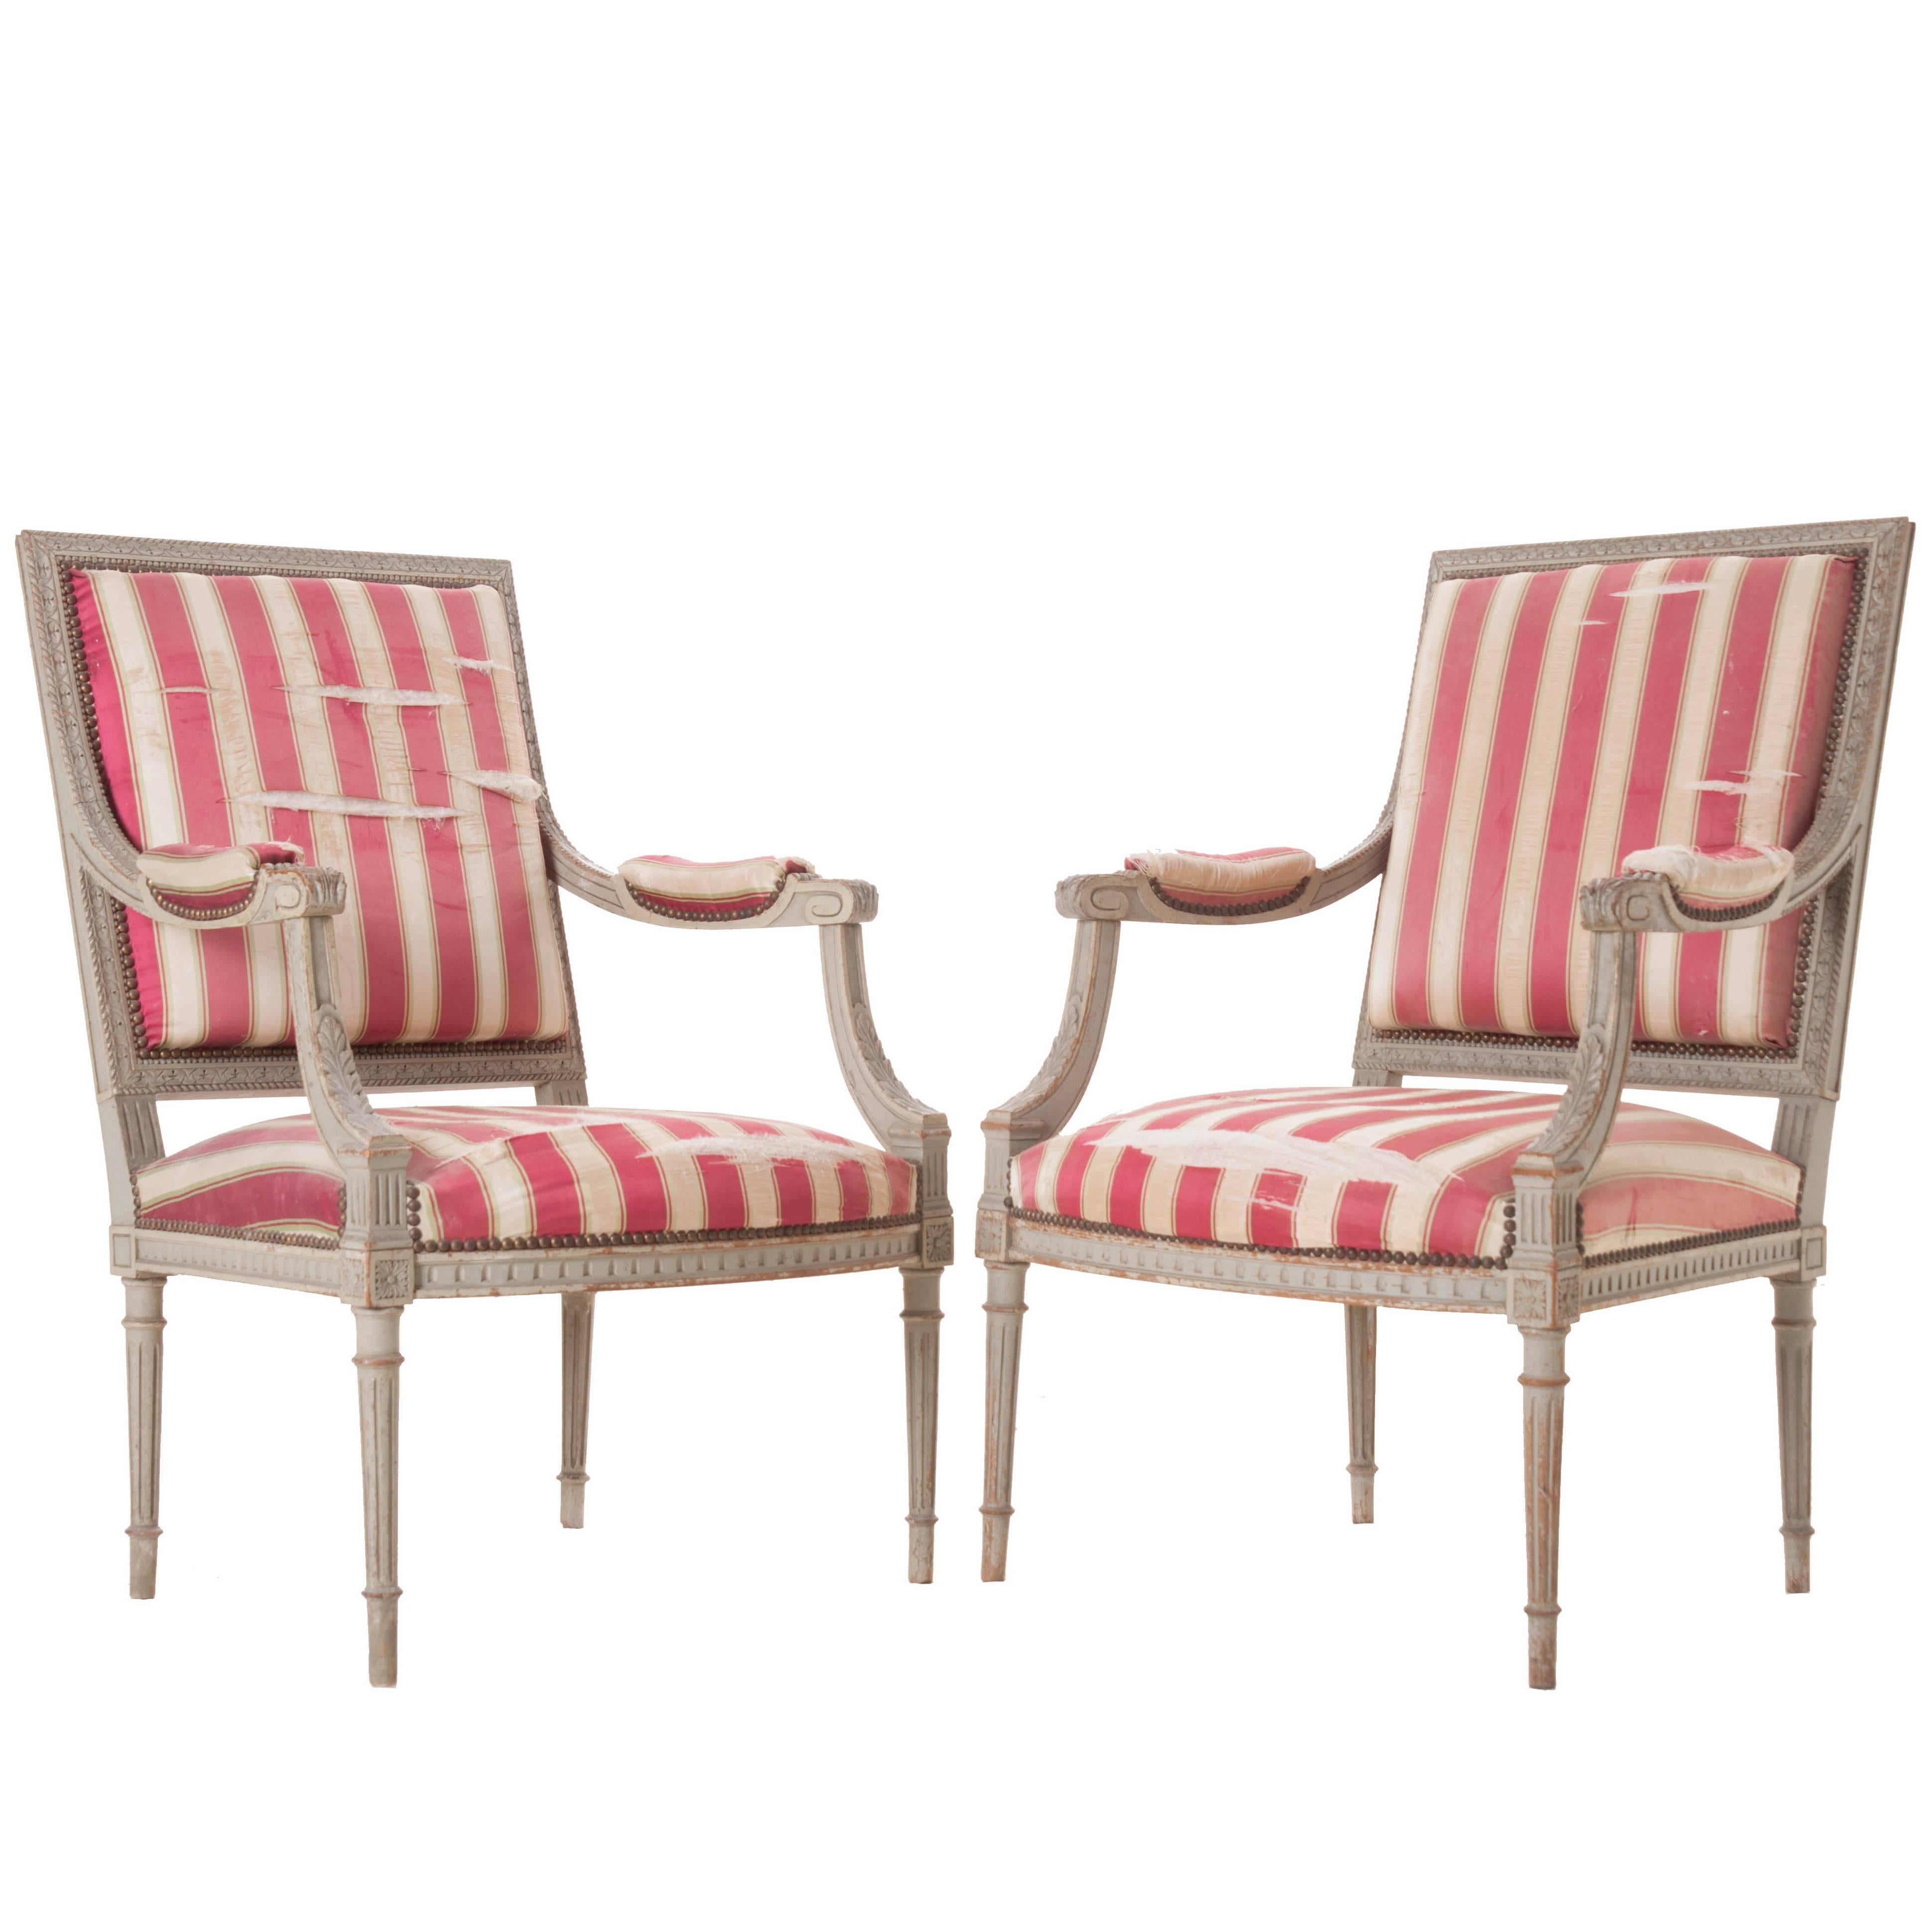 Pair of French 19th Century Painted Louis XVI Style Fauteuils